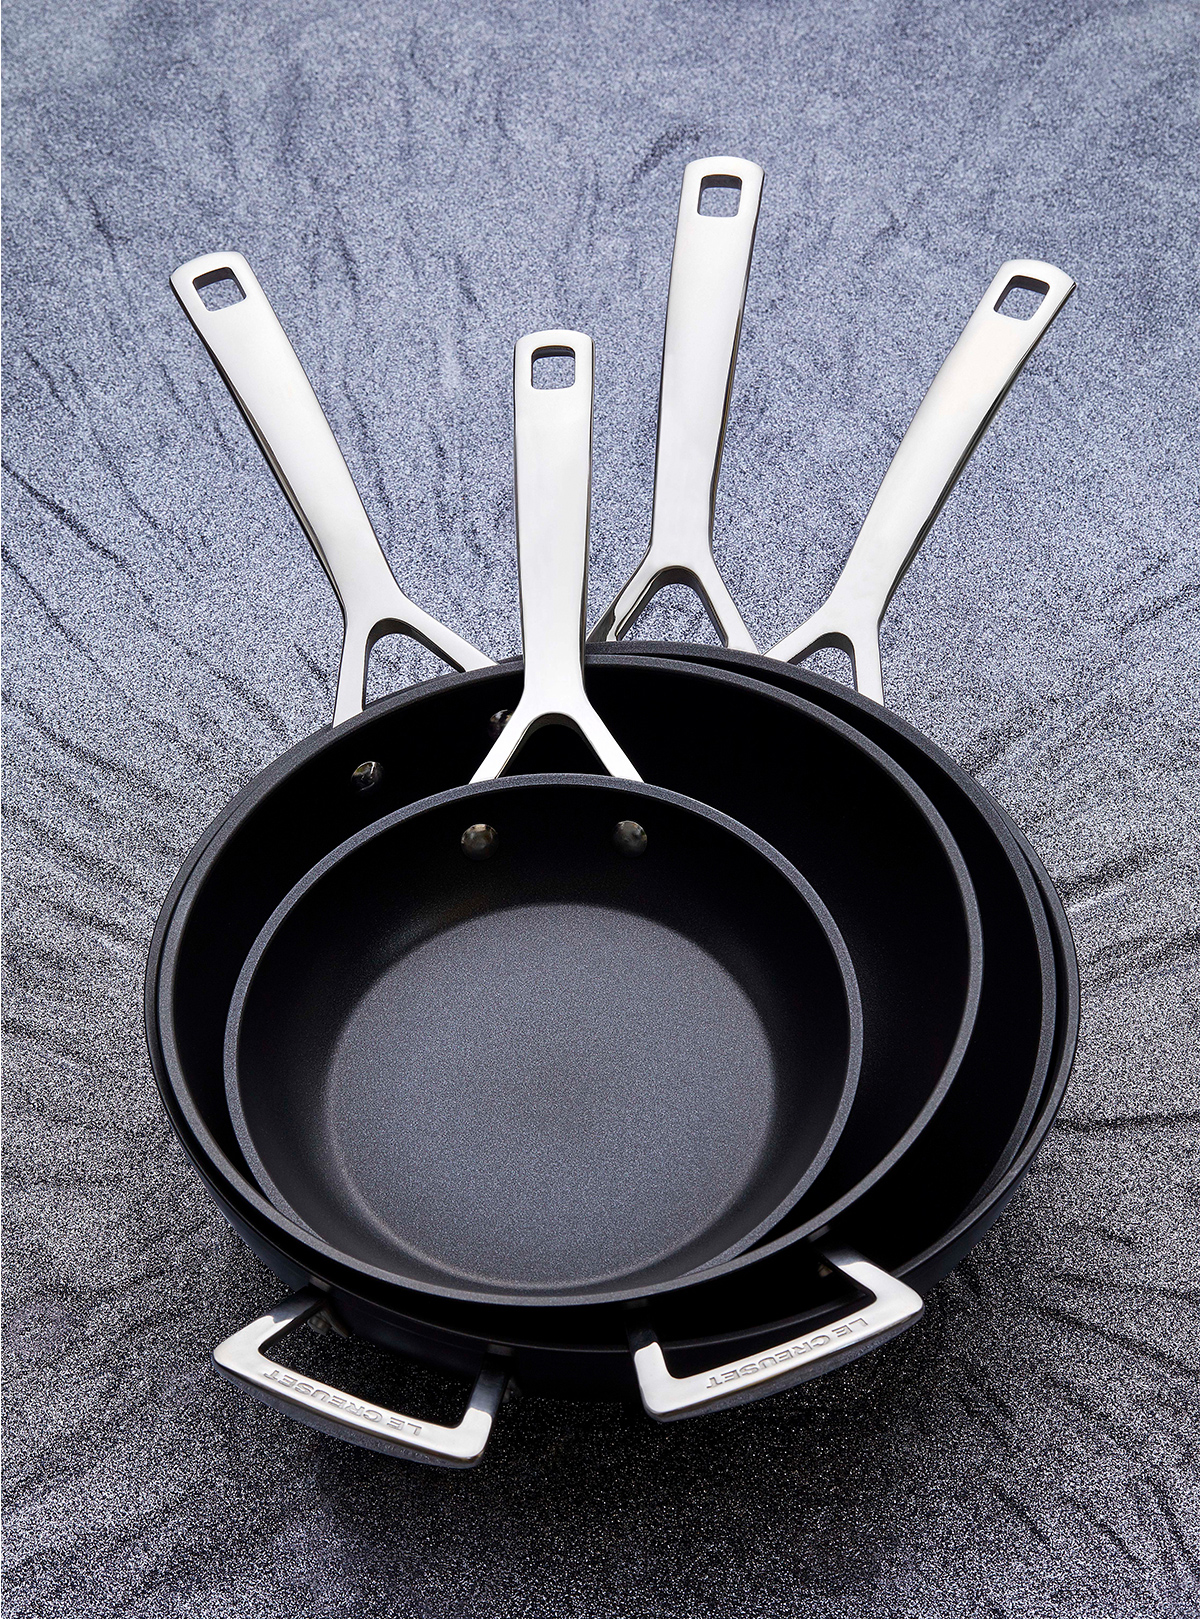 Le Creuset  Le Creuset Frying Pan Buying Guide